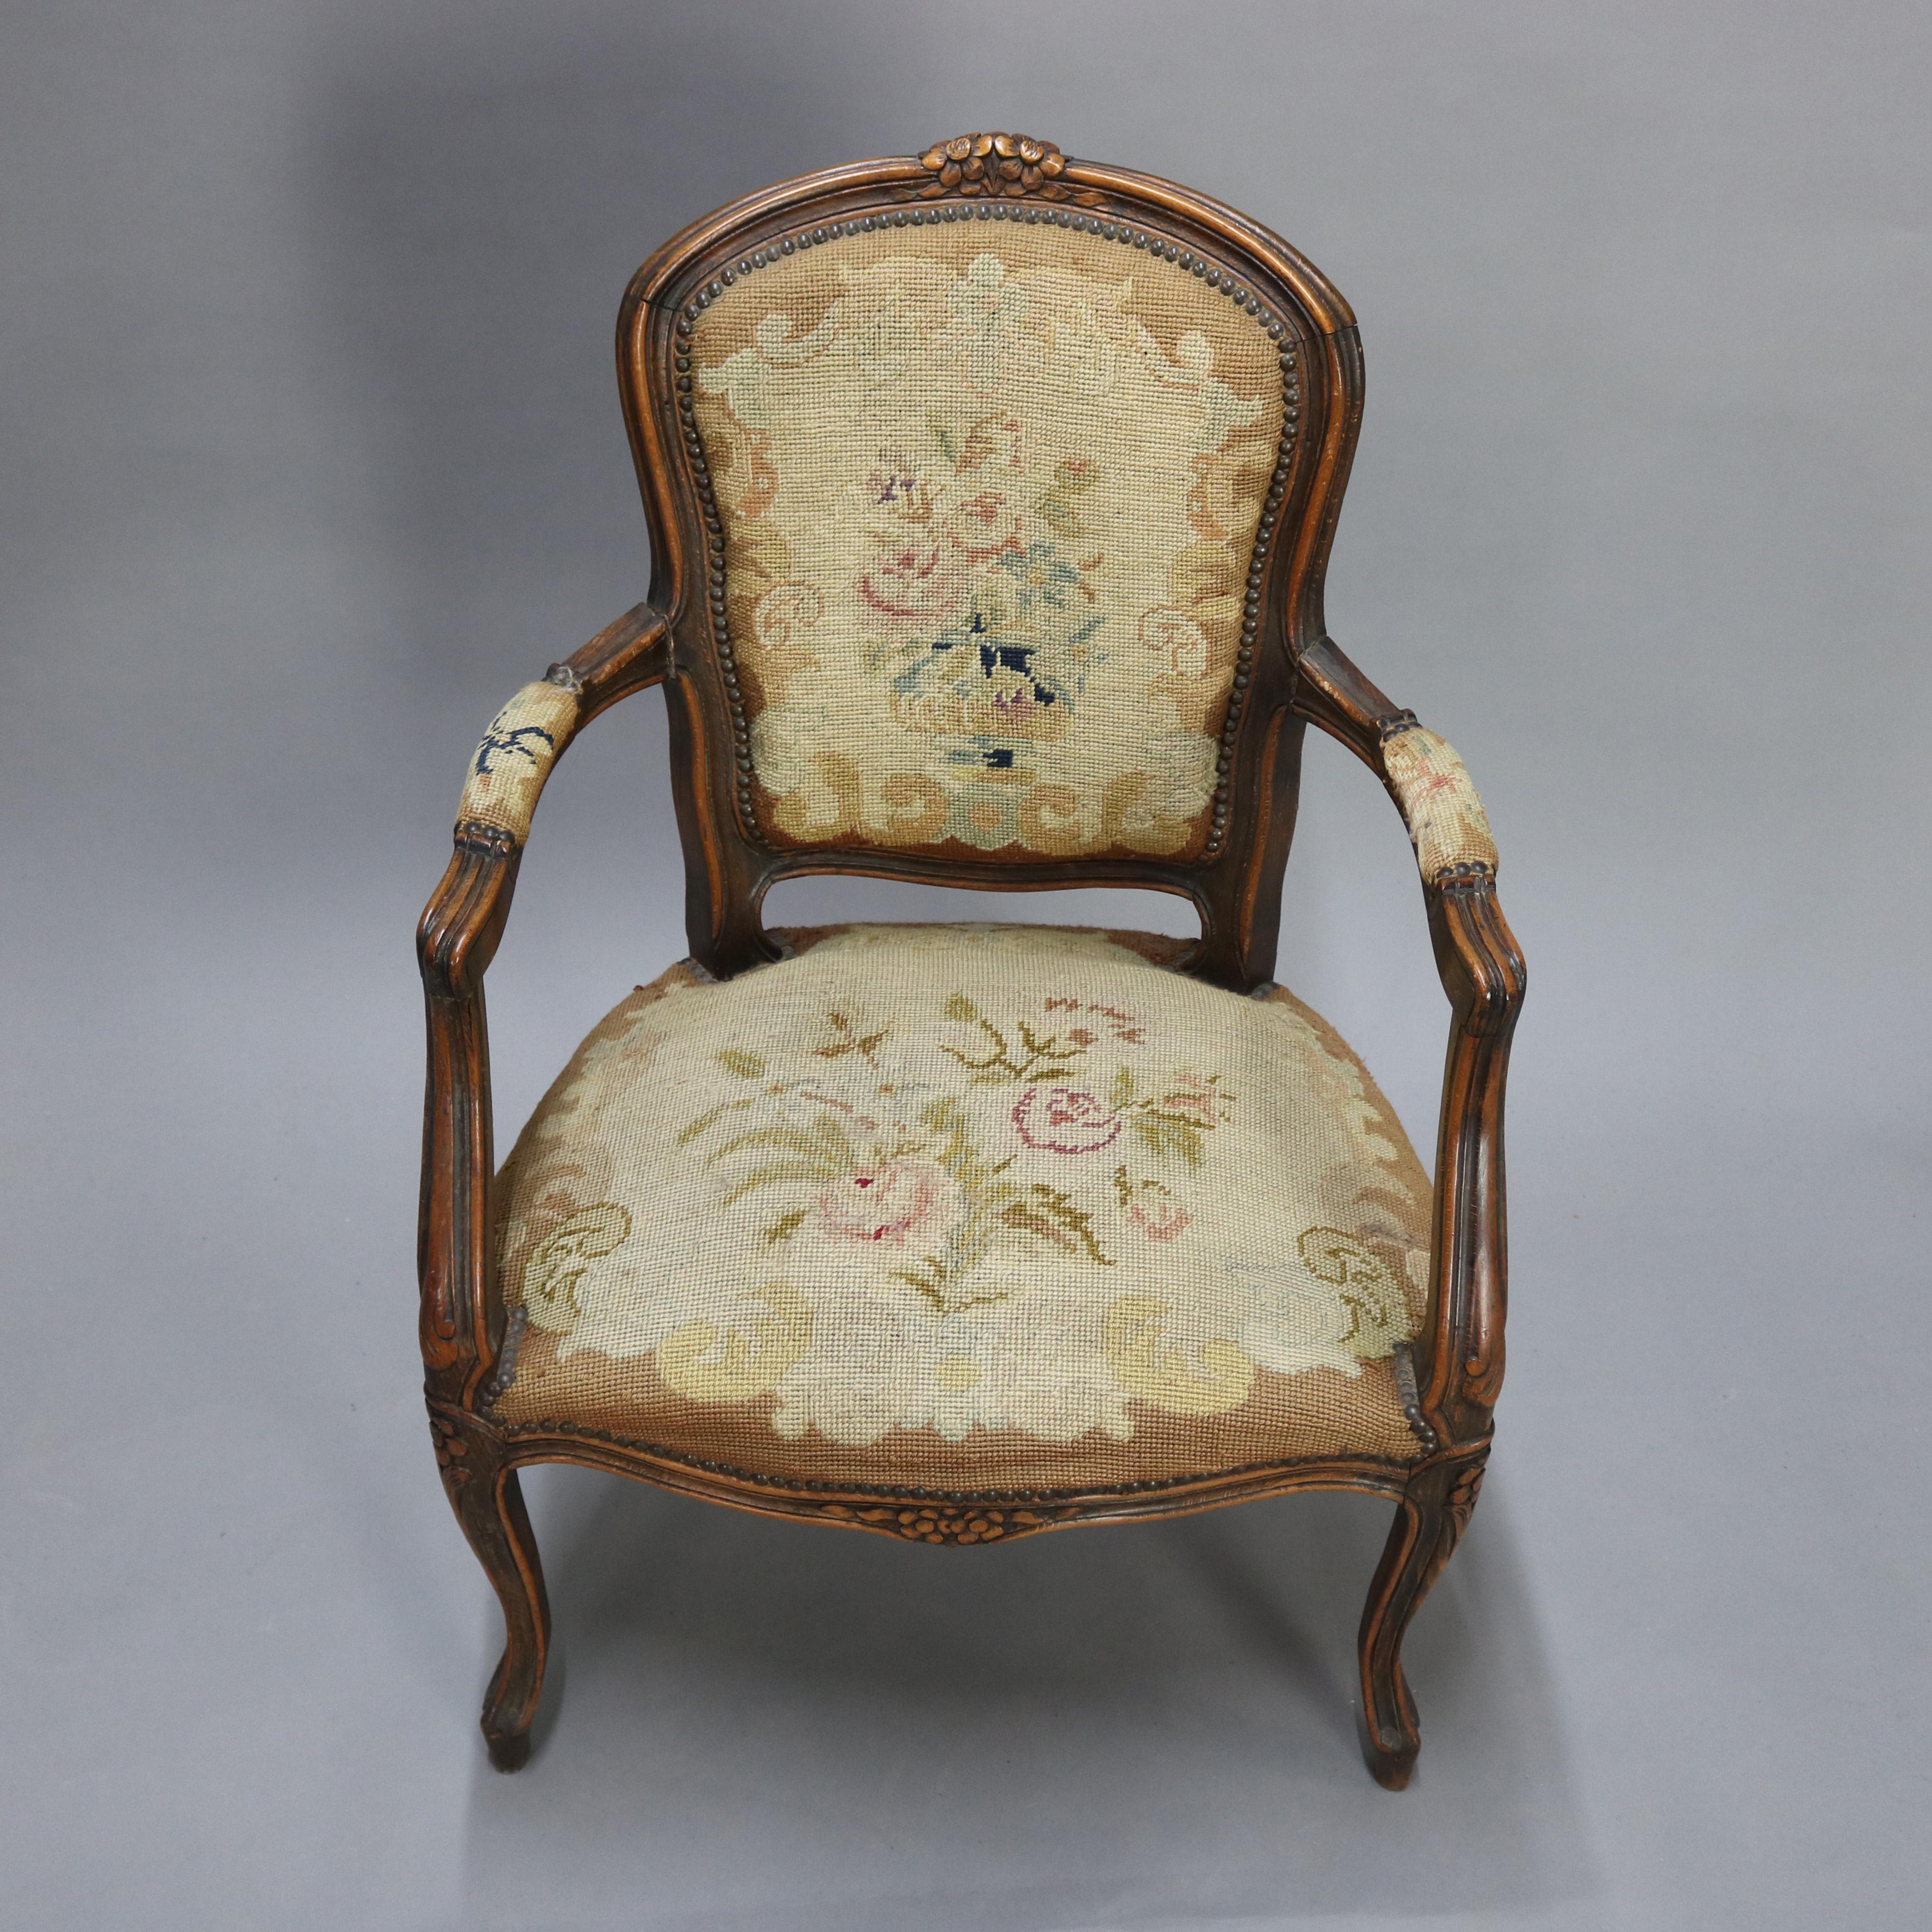 An antique French Louis XVI fauteuil armchair offers fruitwood frame with carved floral crest, apron and knees with floral panier de fleurs needlepoint back and seat, raised on cabriole legs, 19th century.

Measures: 43.5